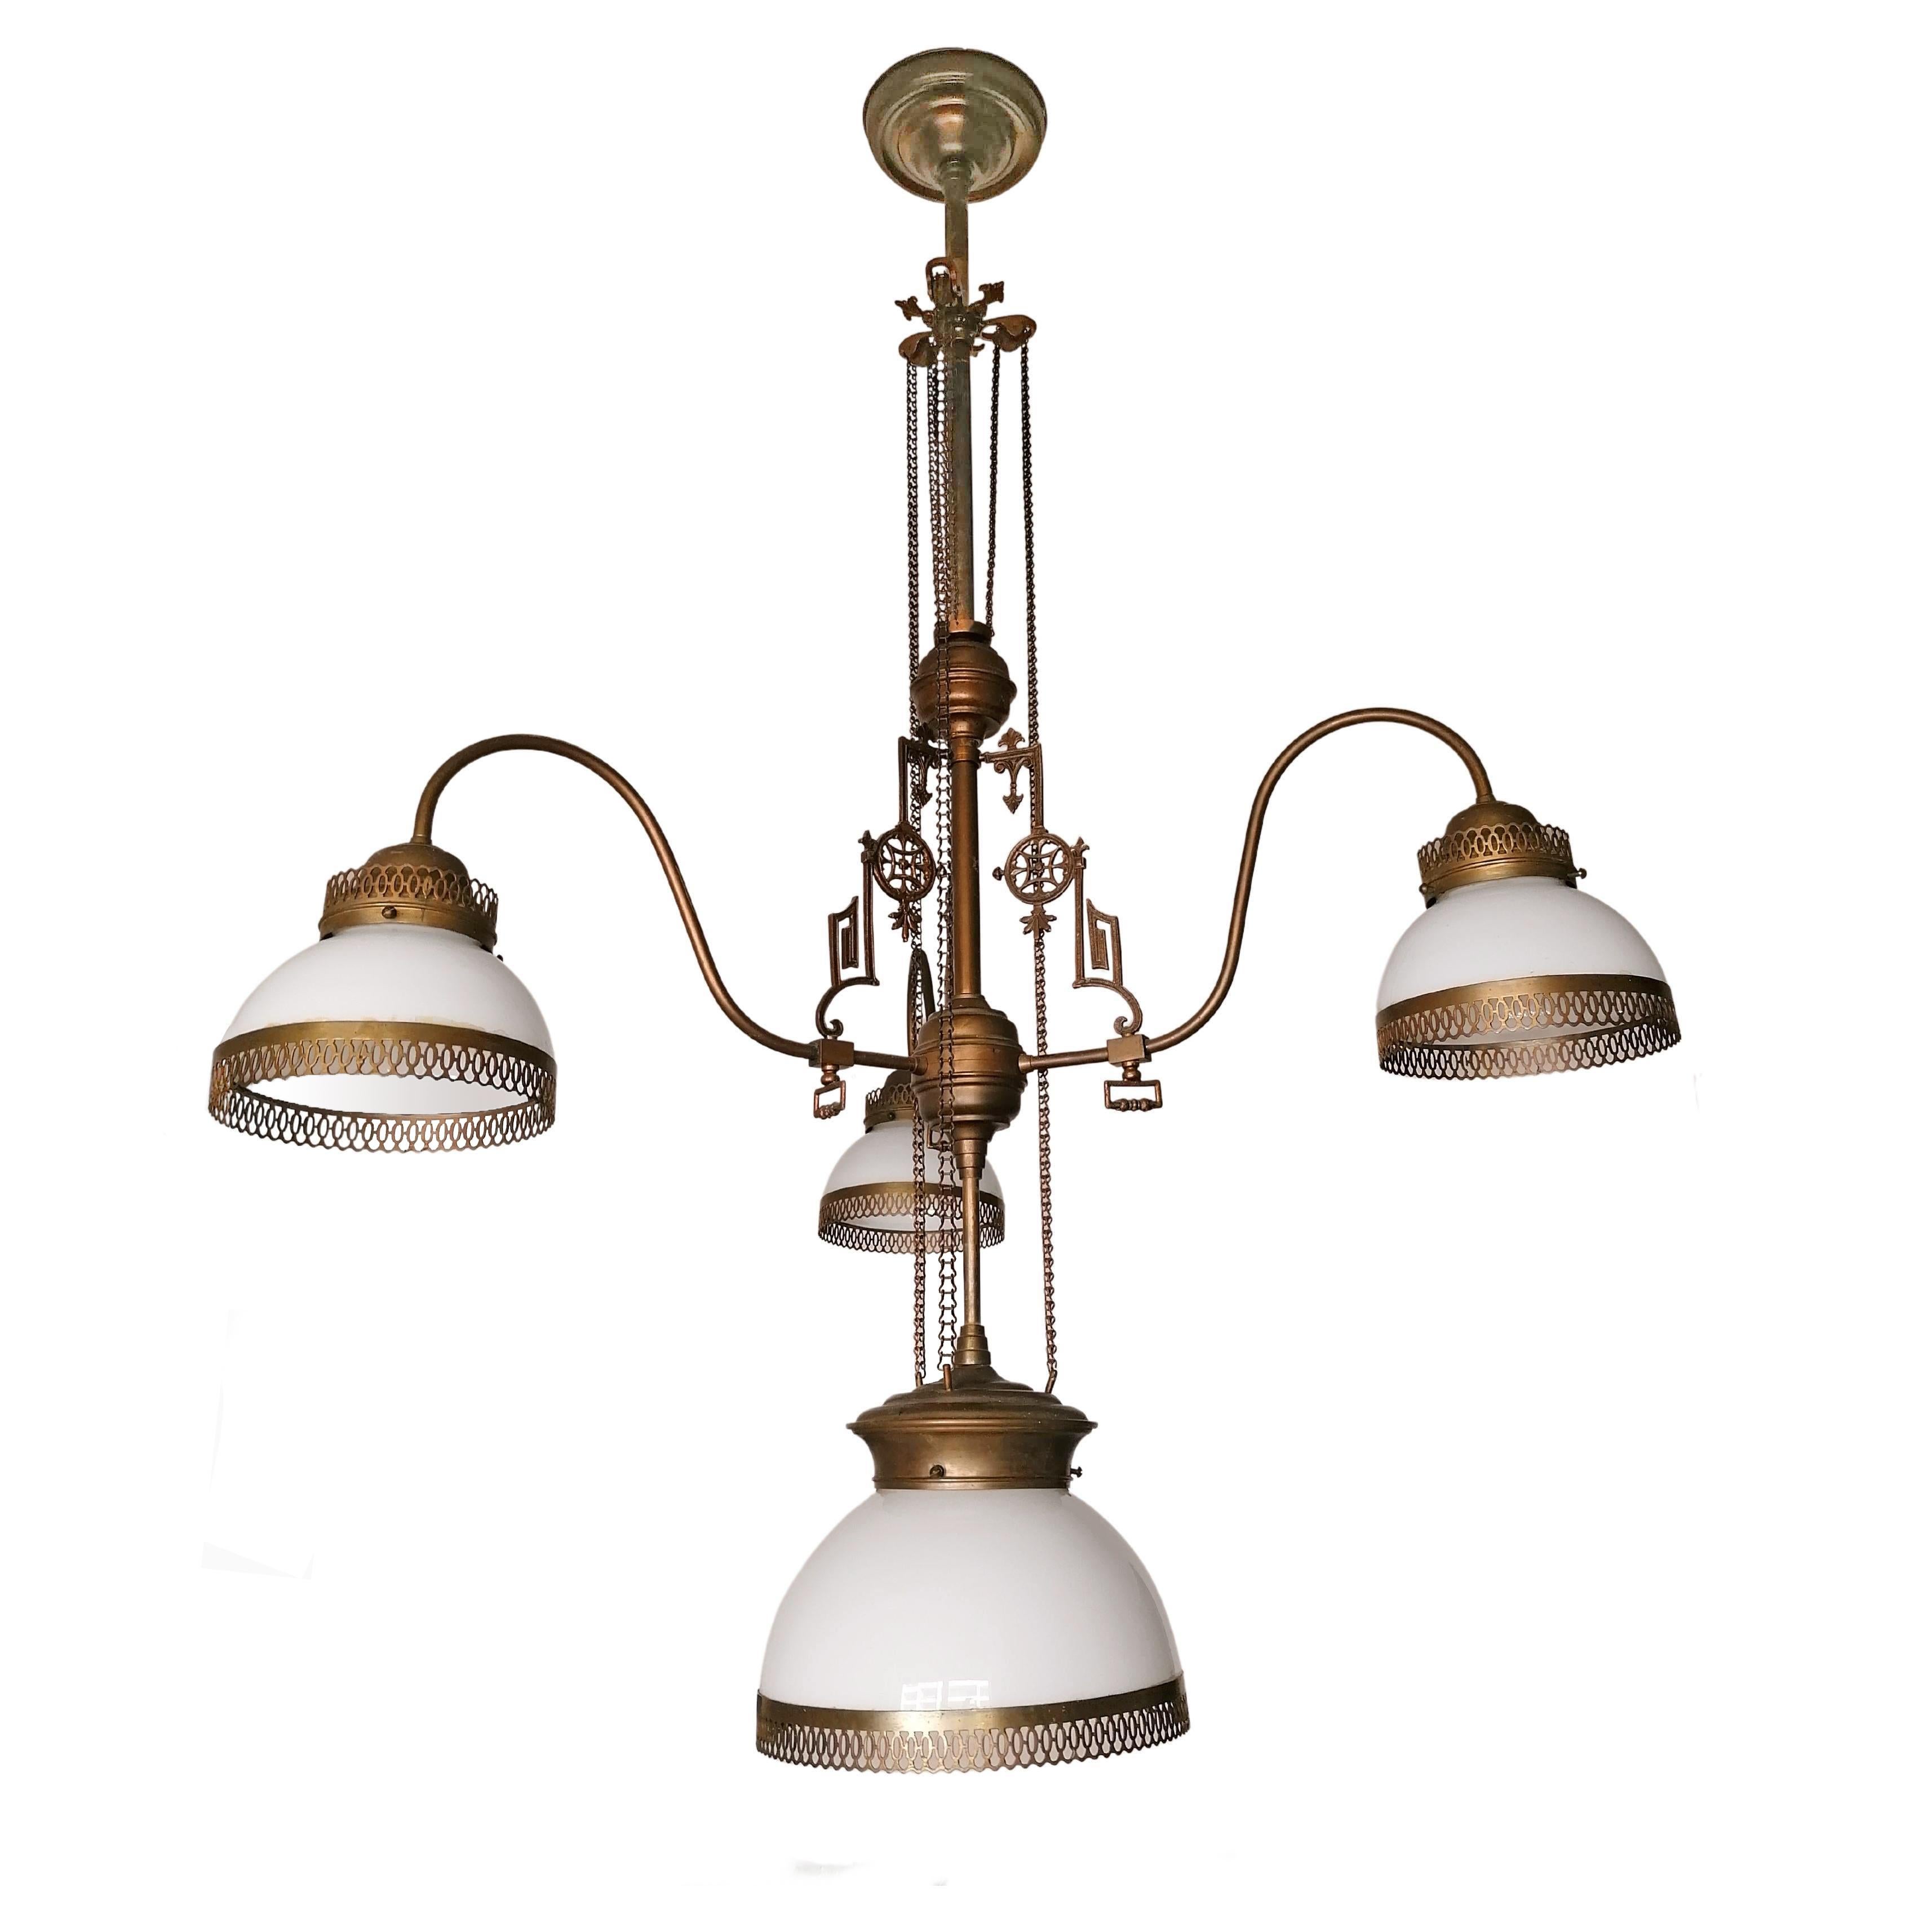 Stunning French Art Deco chandelier in Opaline glass and burnished brass with brass Trimmig and Chains, circa 1920. In mint condition. The height of the chandelier is regulated by the traction chains extending or shortening the rod which holds the